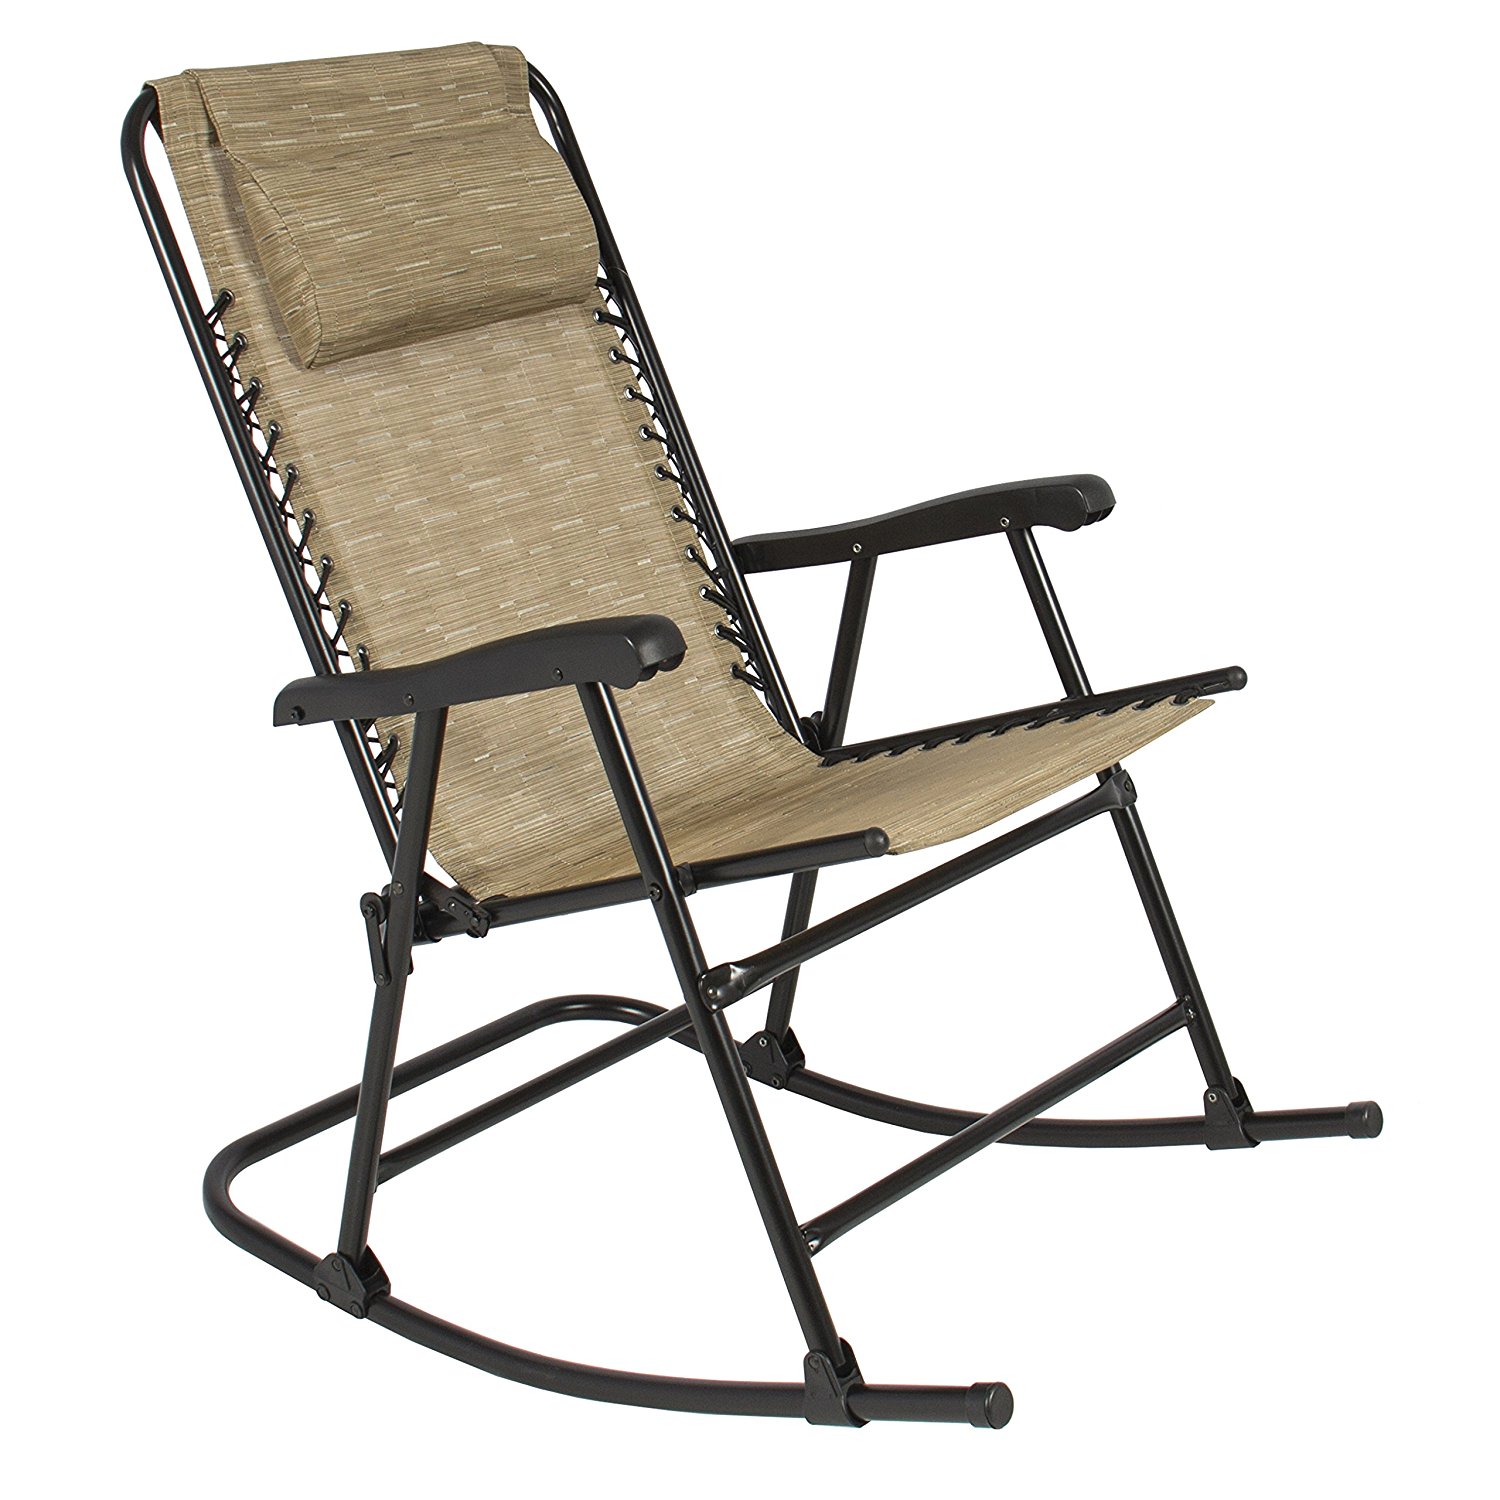 outdoor rocking chair amazon.com: best choice products folding rocking chair foldable rocker  outdoor patio furniture HAFTFQY